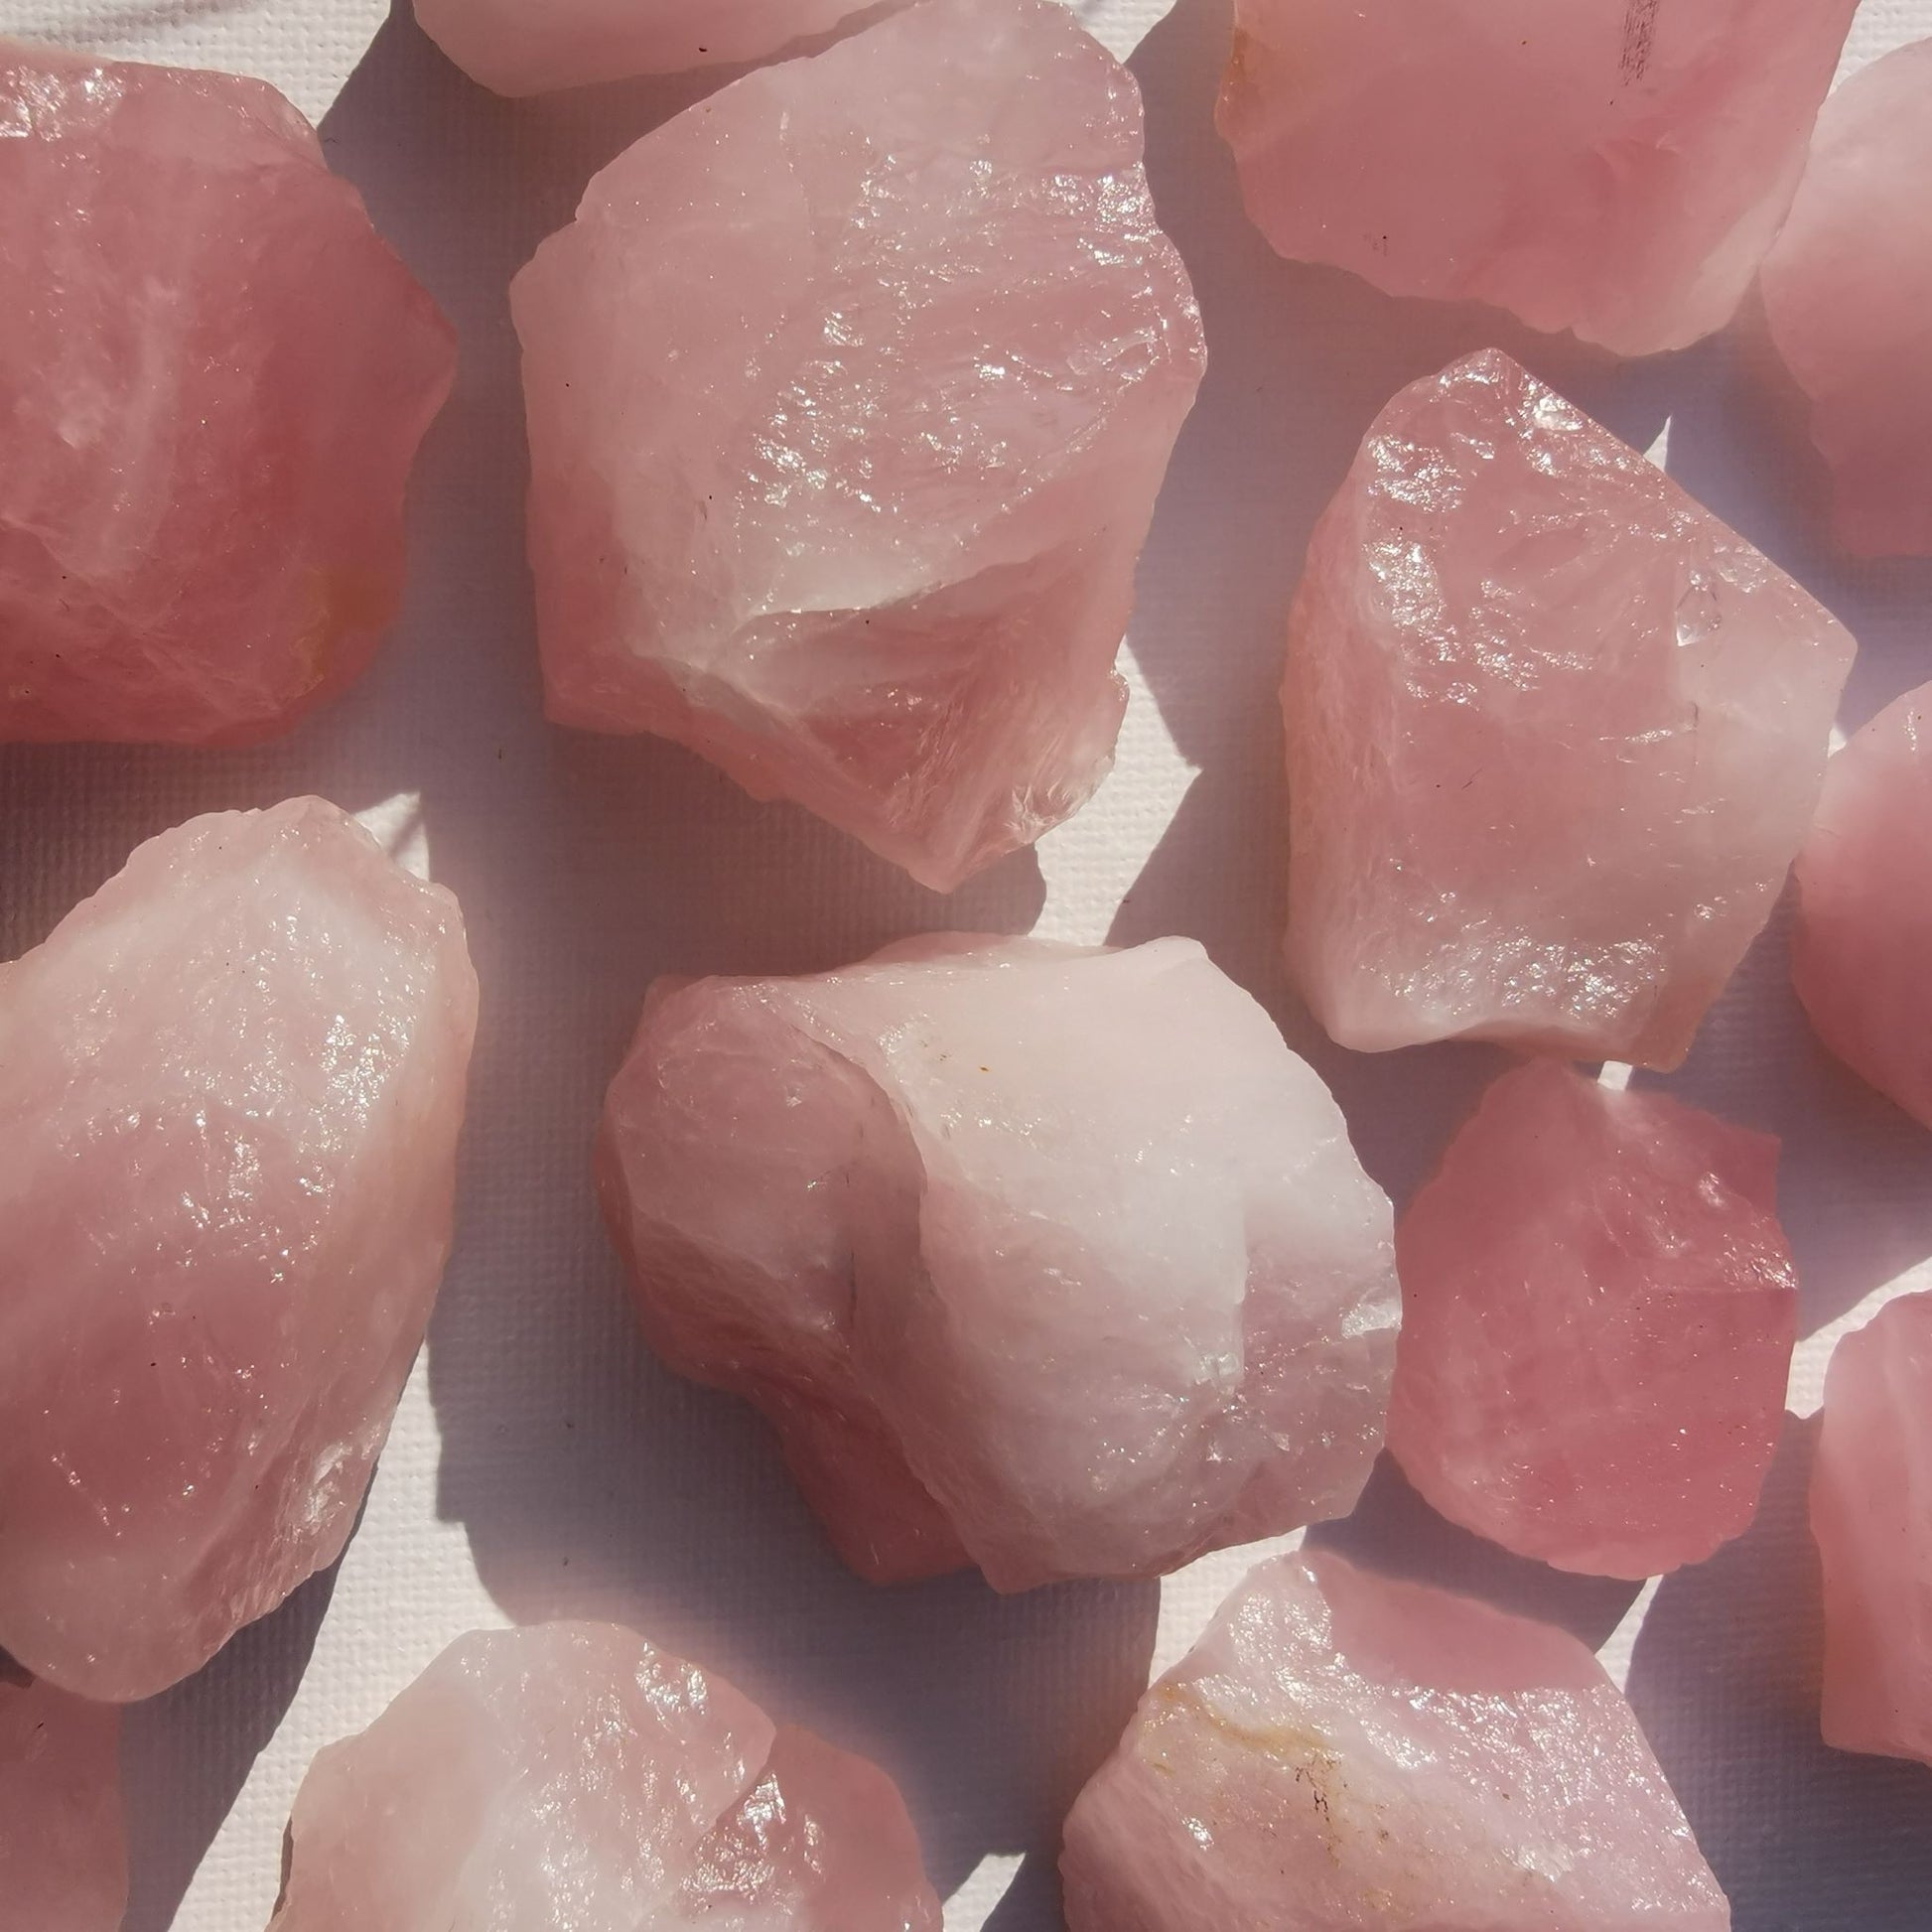 Dumi's Crystals | Rough Rose Quartz Crystals (Growth & Connection) | A collection of Rough Rose Quartz Crystals, reminders of self-love and connection. Rose Quartz fosters love, reduces negativity & strengthens bonds. Scatter them in your home or bedroom to create a loving environment, promote emotional healing & welcome deeper connections. Embrace the power of Rough Rose Quartz from Dumi's Crystals!